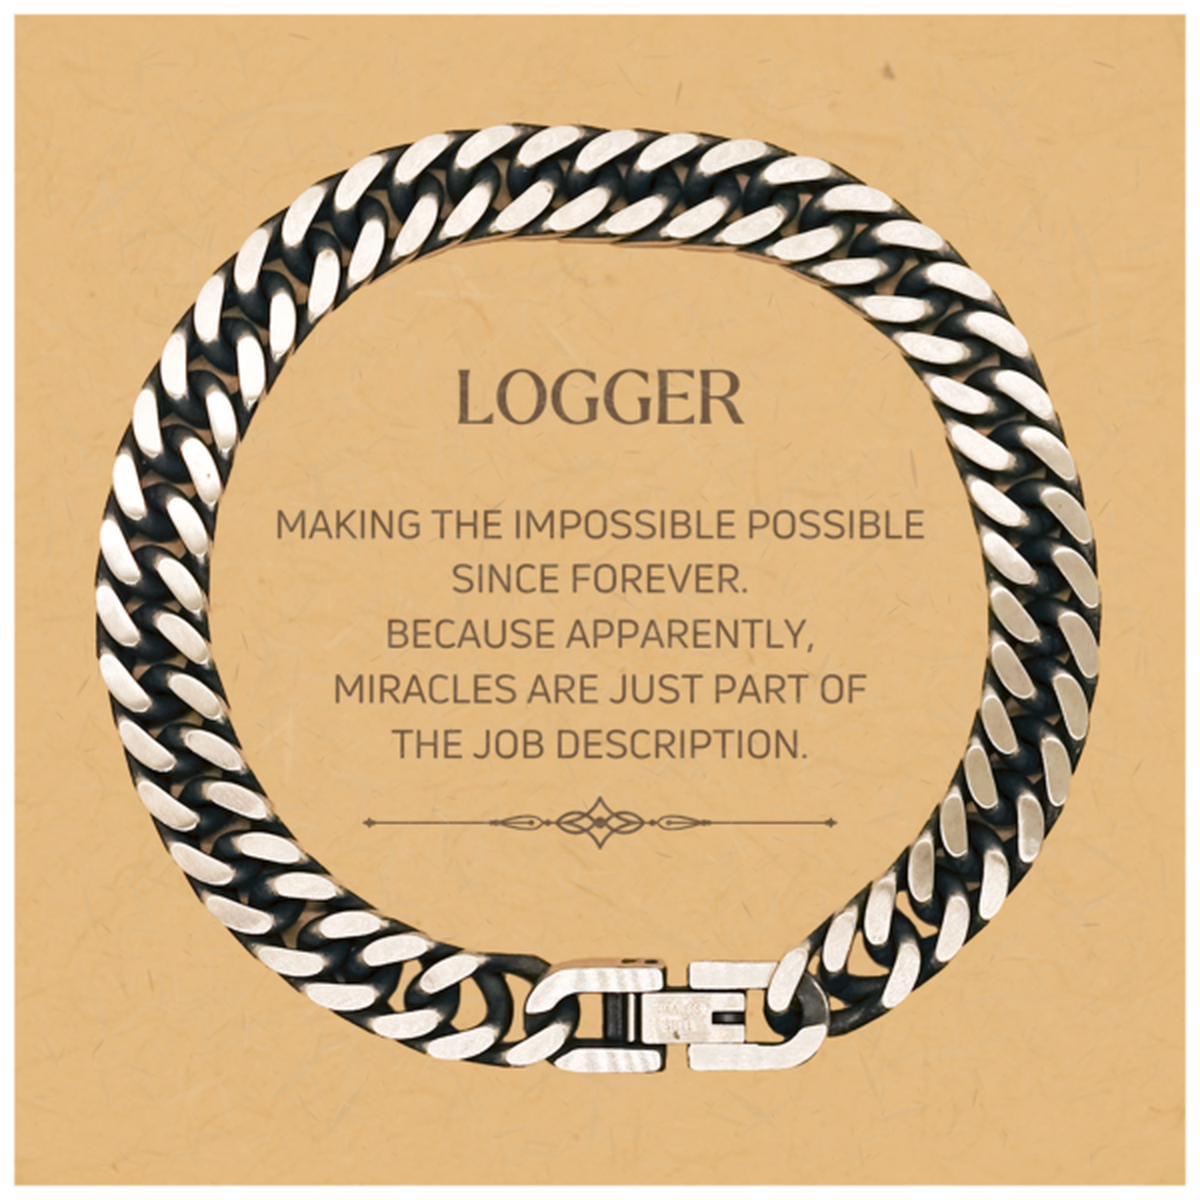 Funny Logger Gifts, Miracles are just part of the job description, Inspirational Birthday Christmas Cuban Link Chain Bracelet For Logger, Men, Women, Coworkers, Friends, Boss